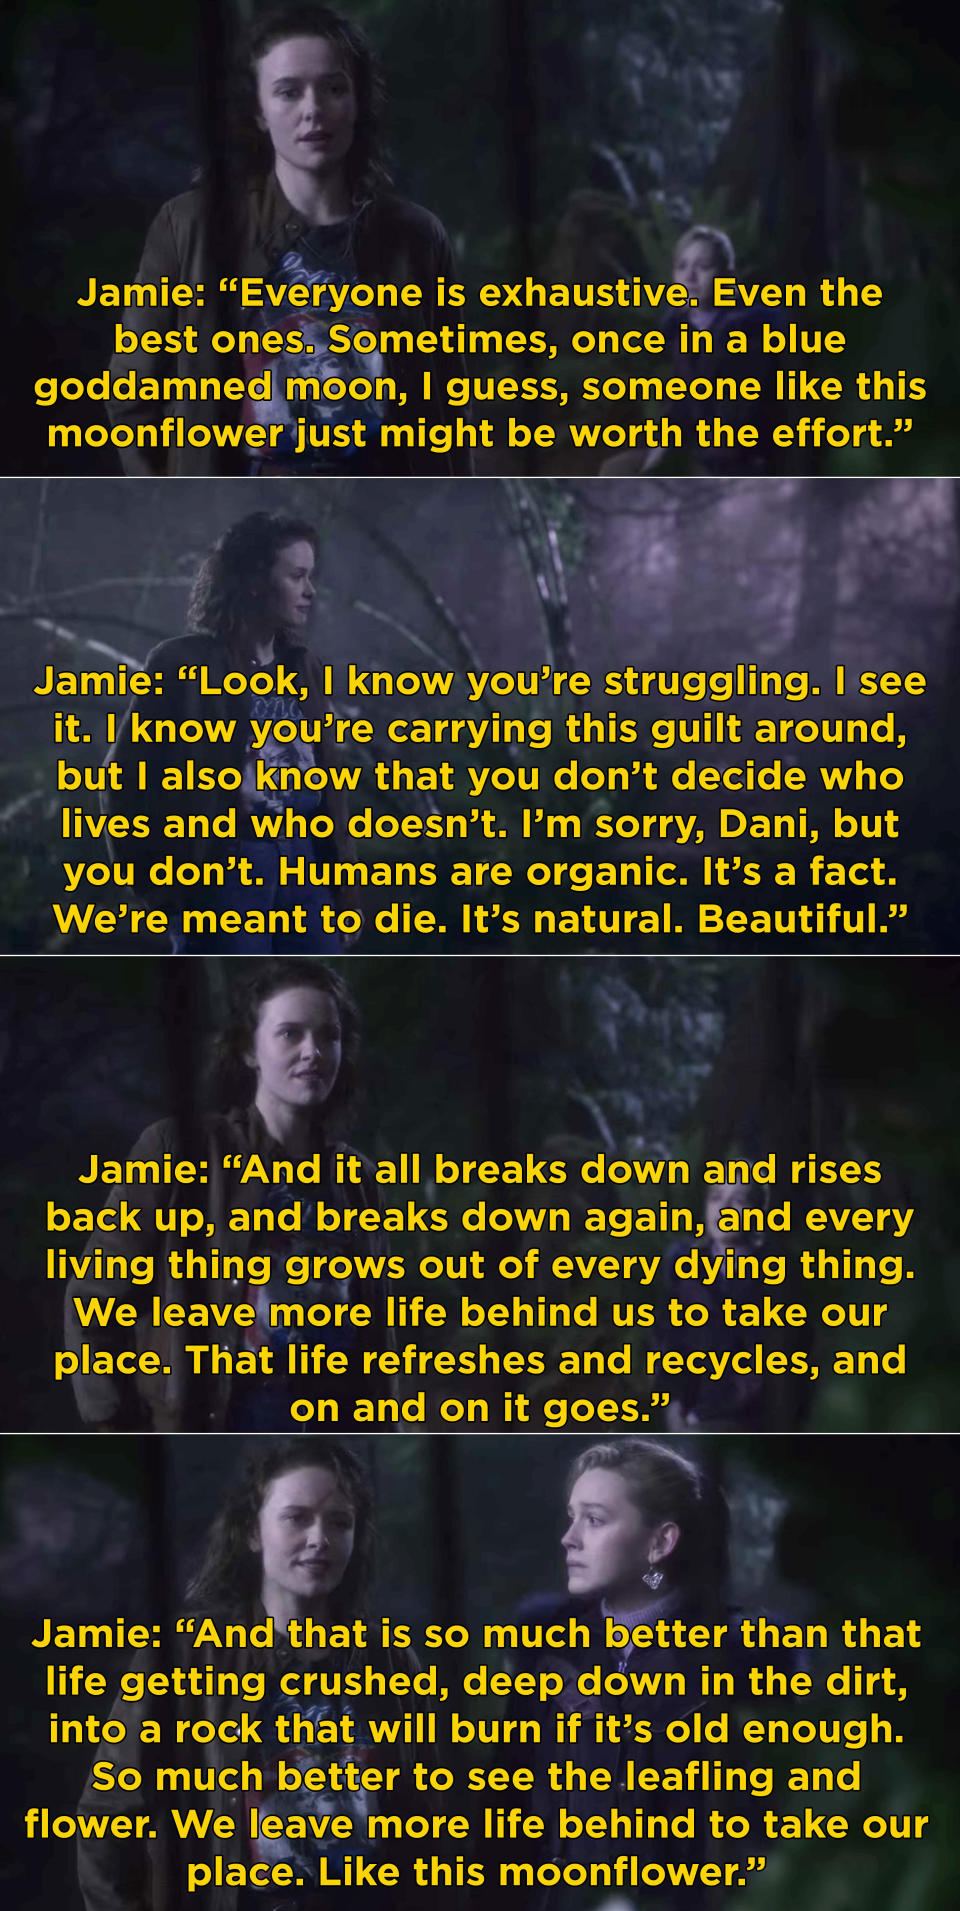 Jamie explaining to Dani how everyone dies, but then we become part of the earth and help new life grow